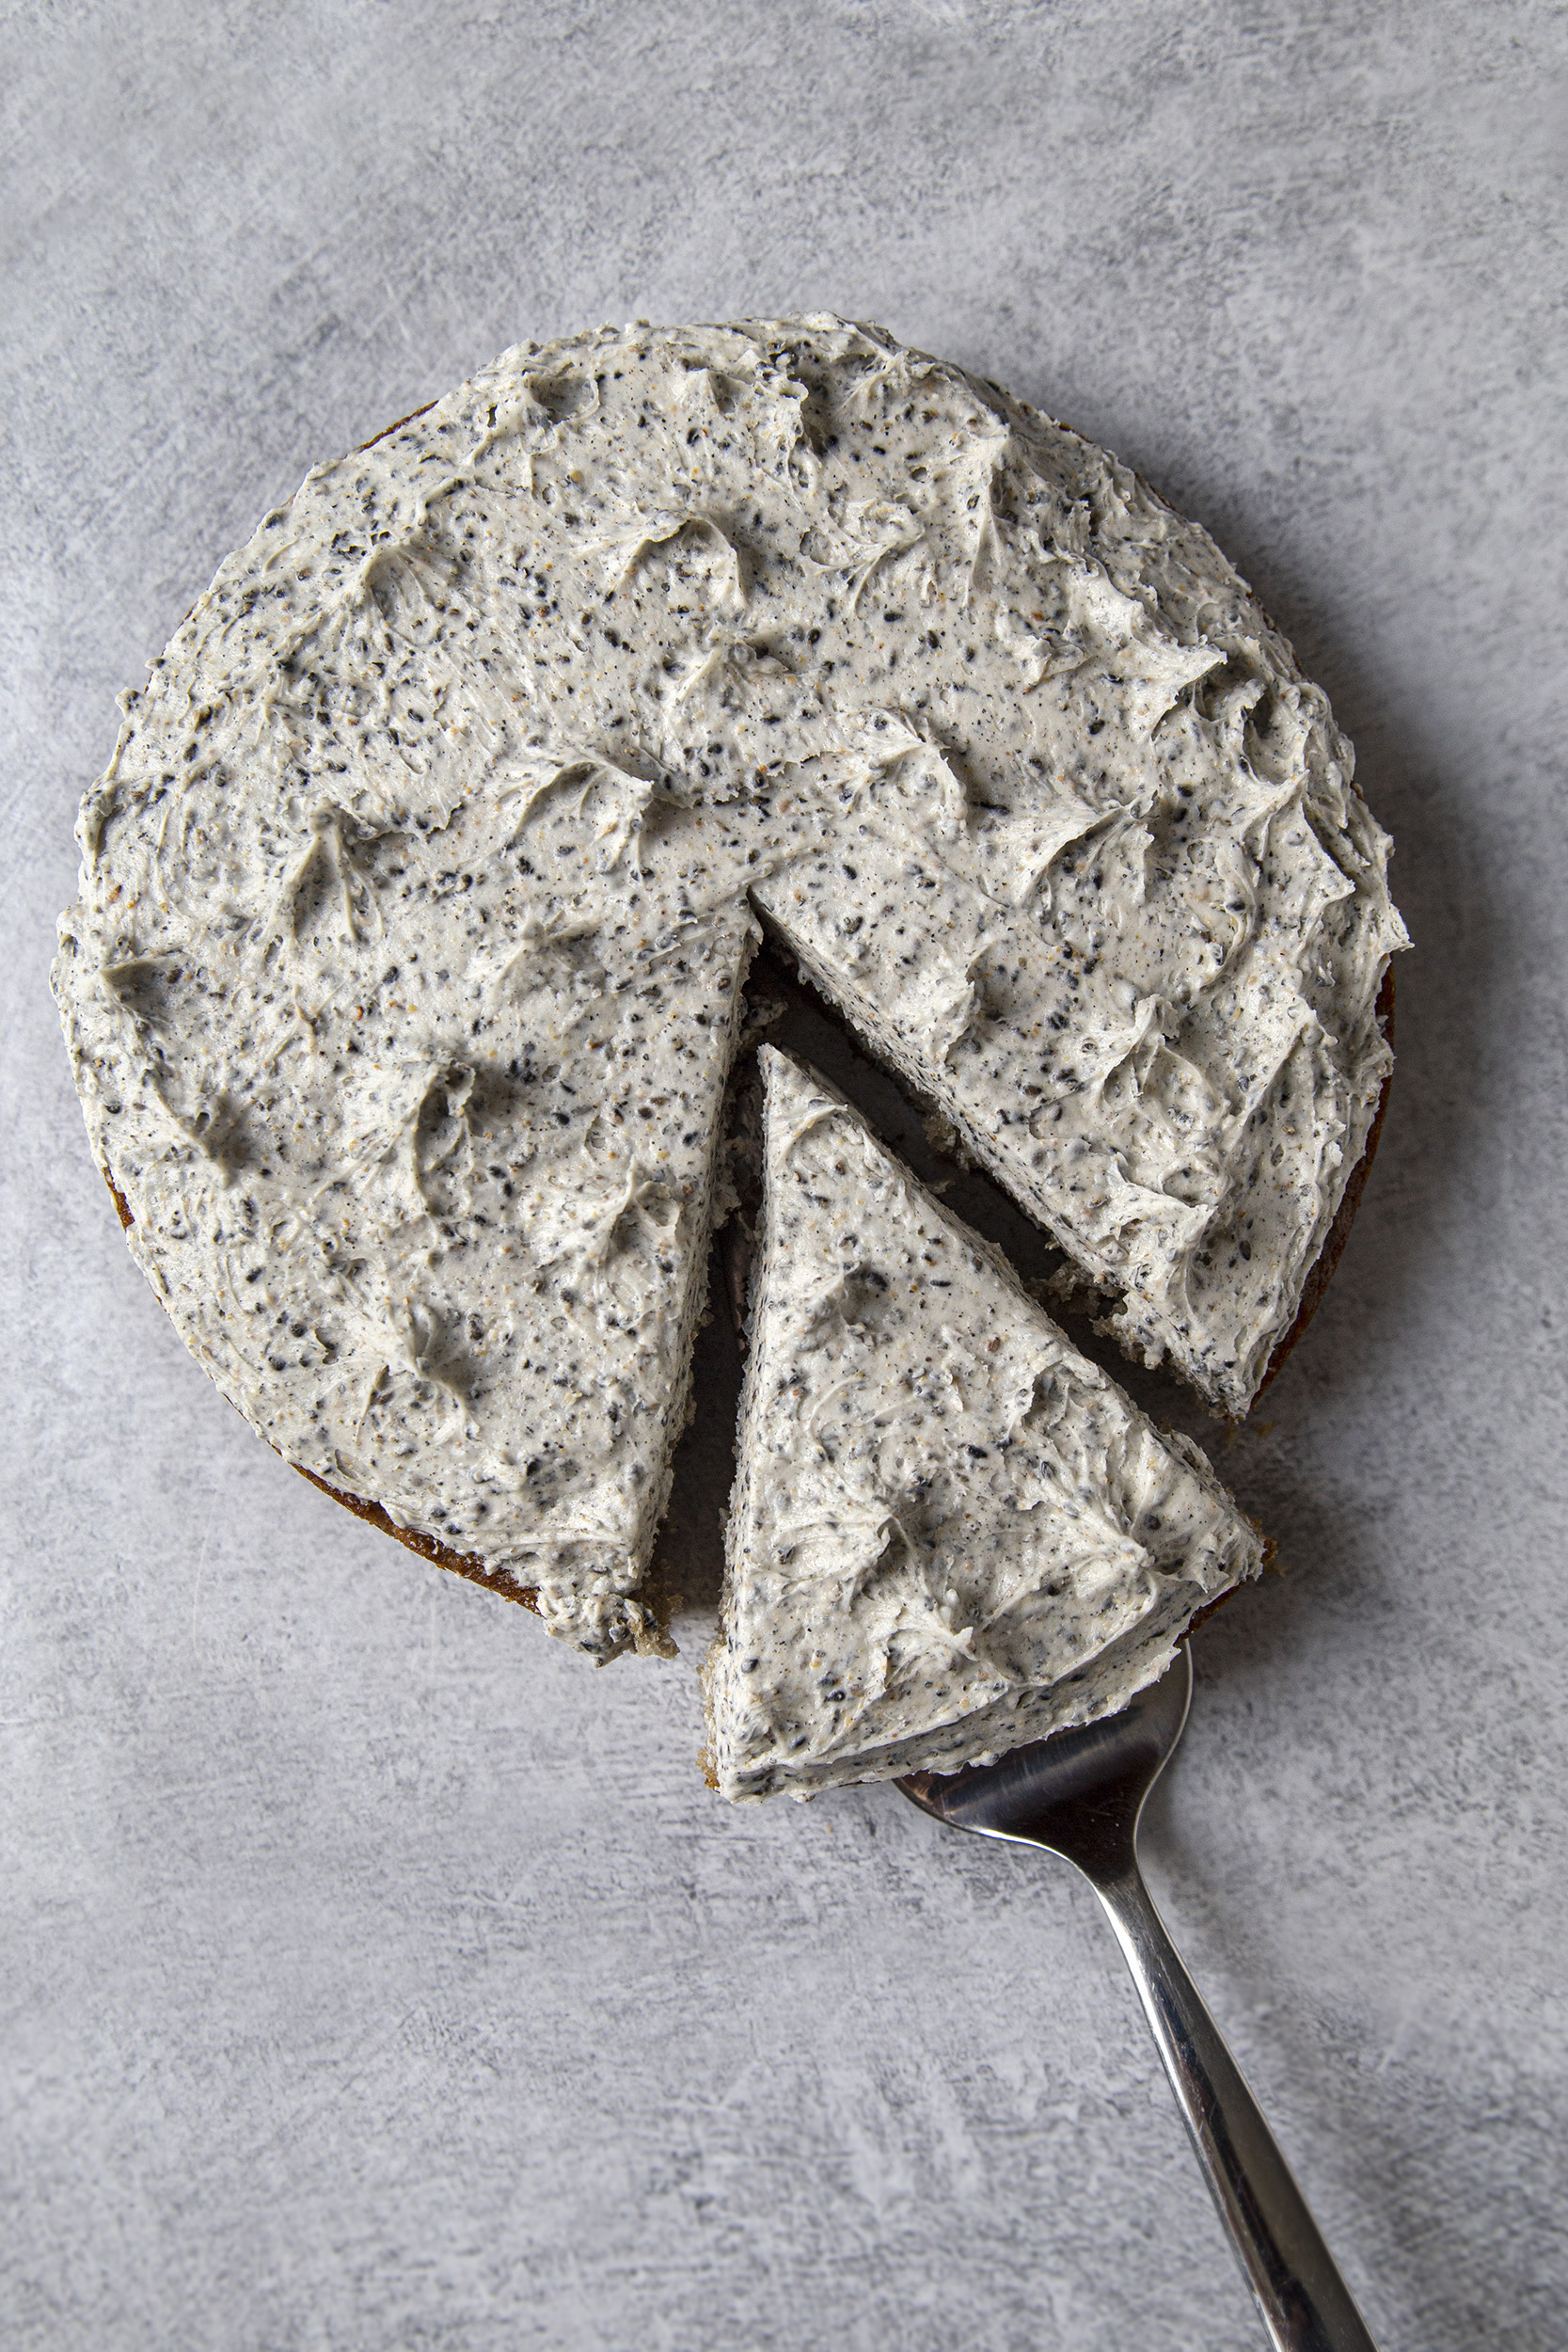 Bird's eye view of black sesame cake, shown on grey background, with a cake slice cut